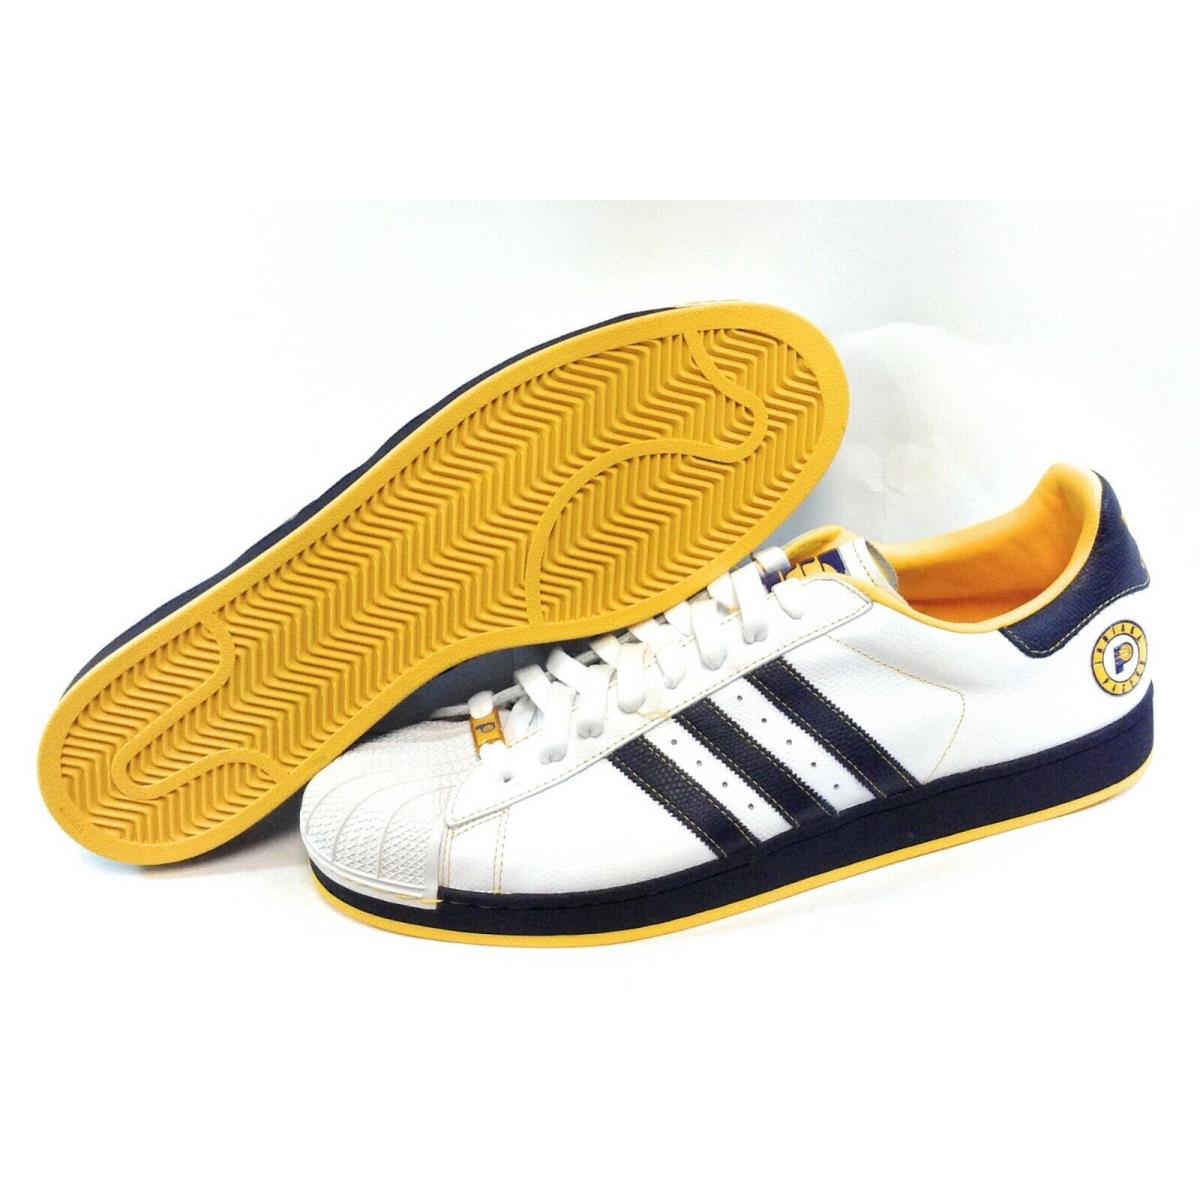 Mens Adidas Superstar 1 014164 Indiana Pacers Leather Nba 2006 Sneakers Shoes